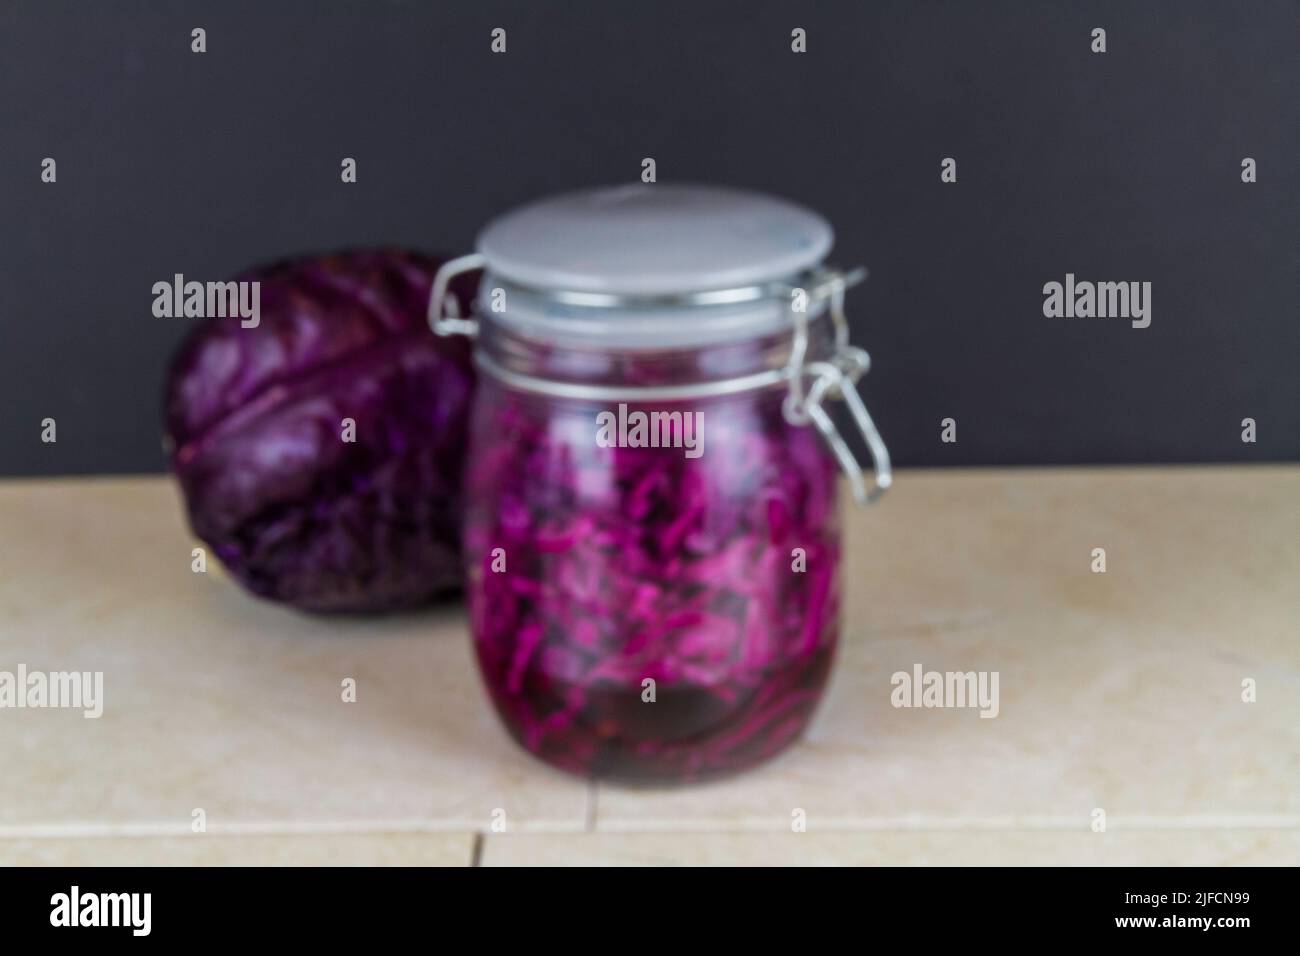 Jar of freshly made sauerkraut with whole red cabbage behind, blurred. Stock Photo